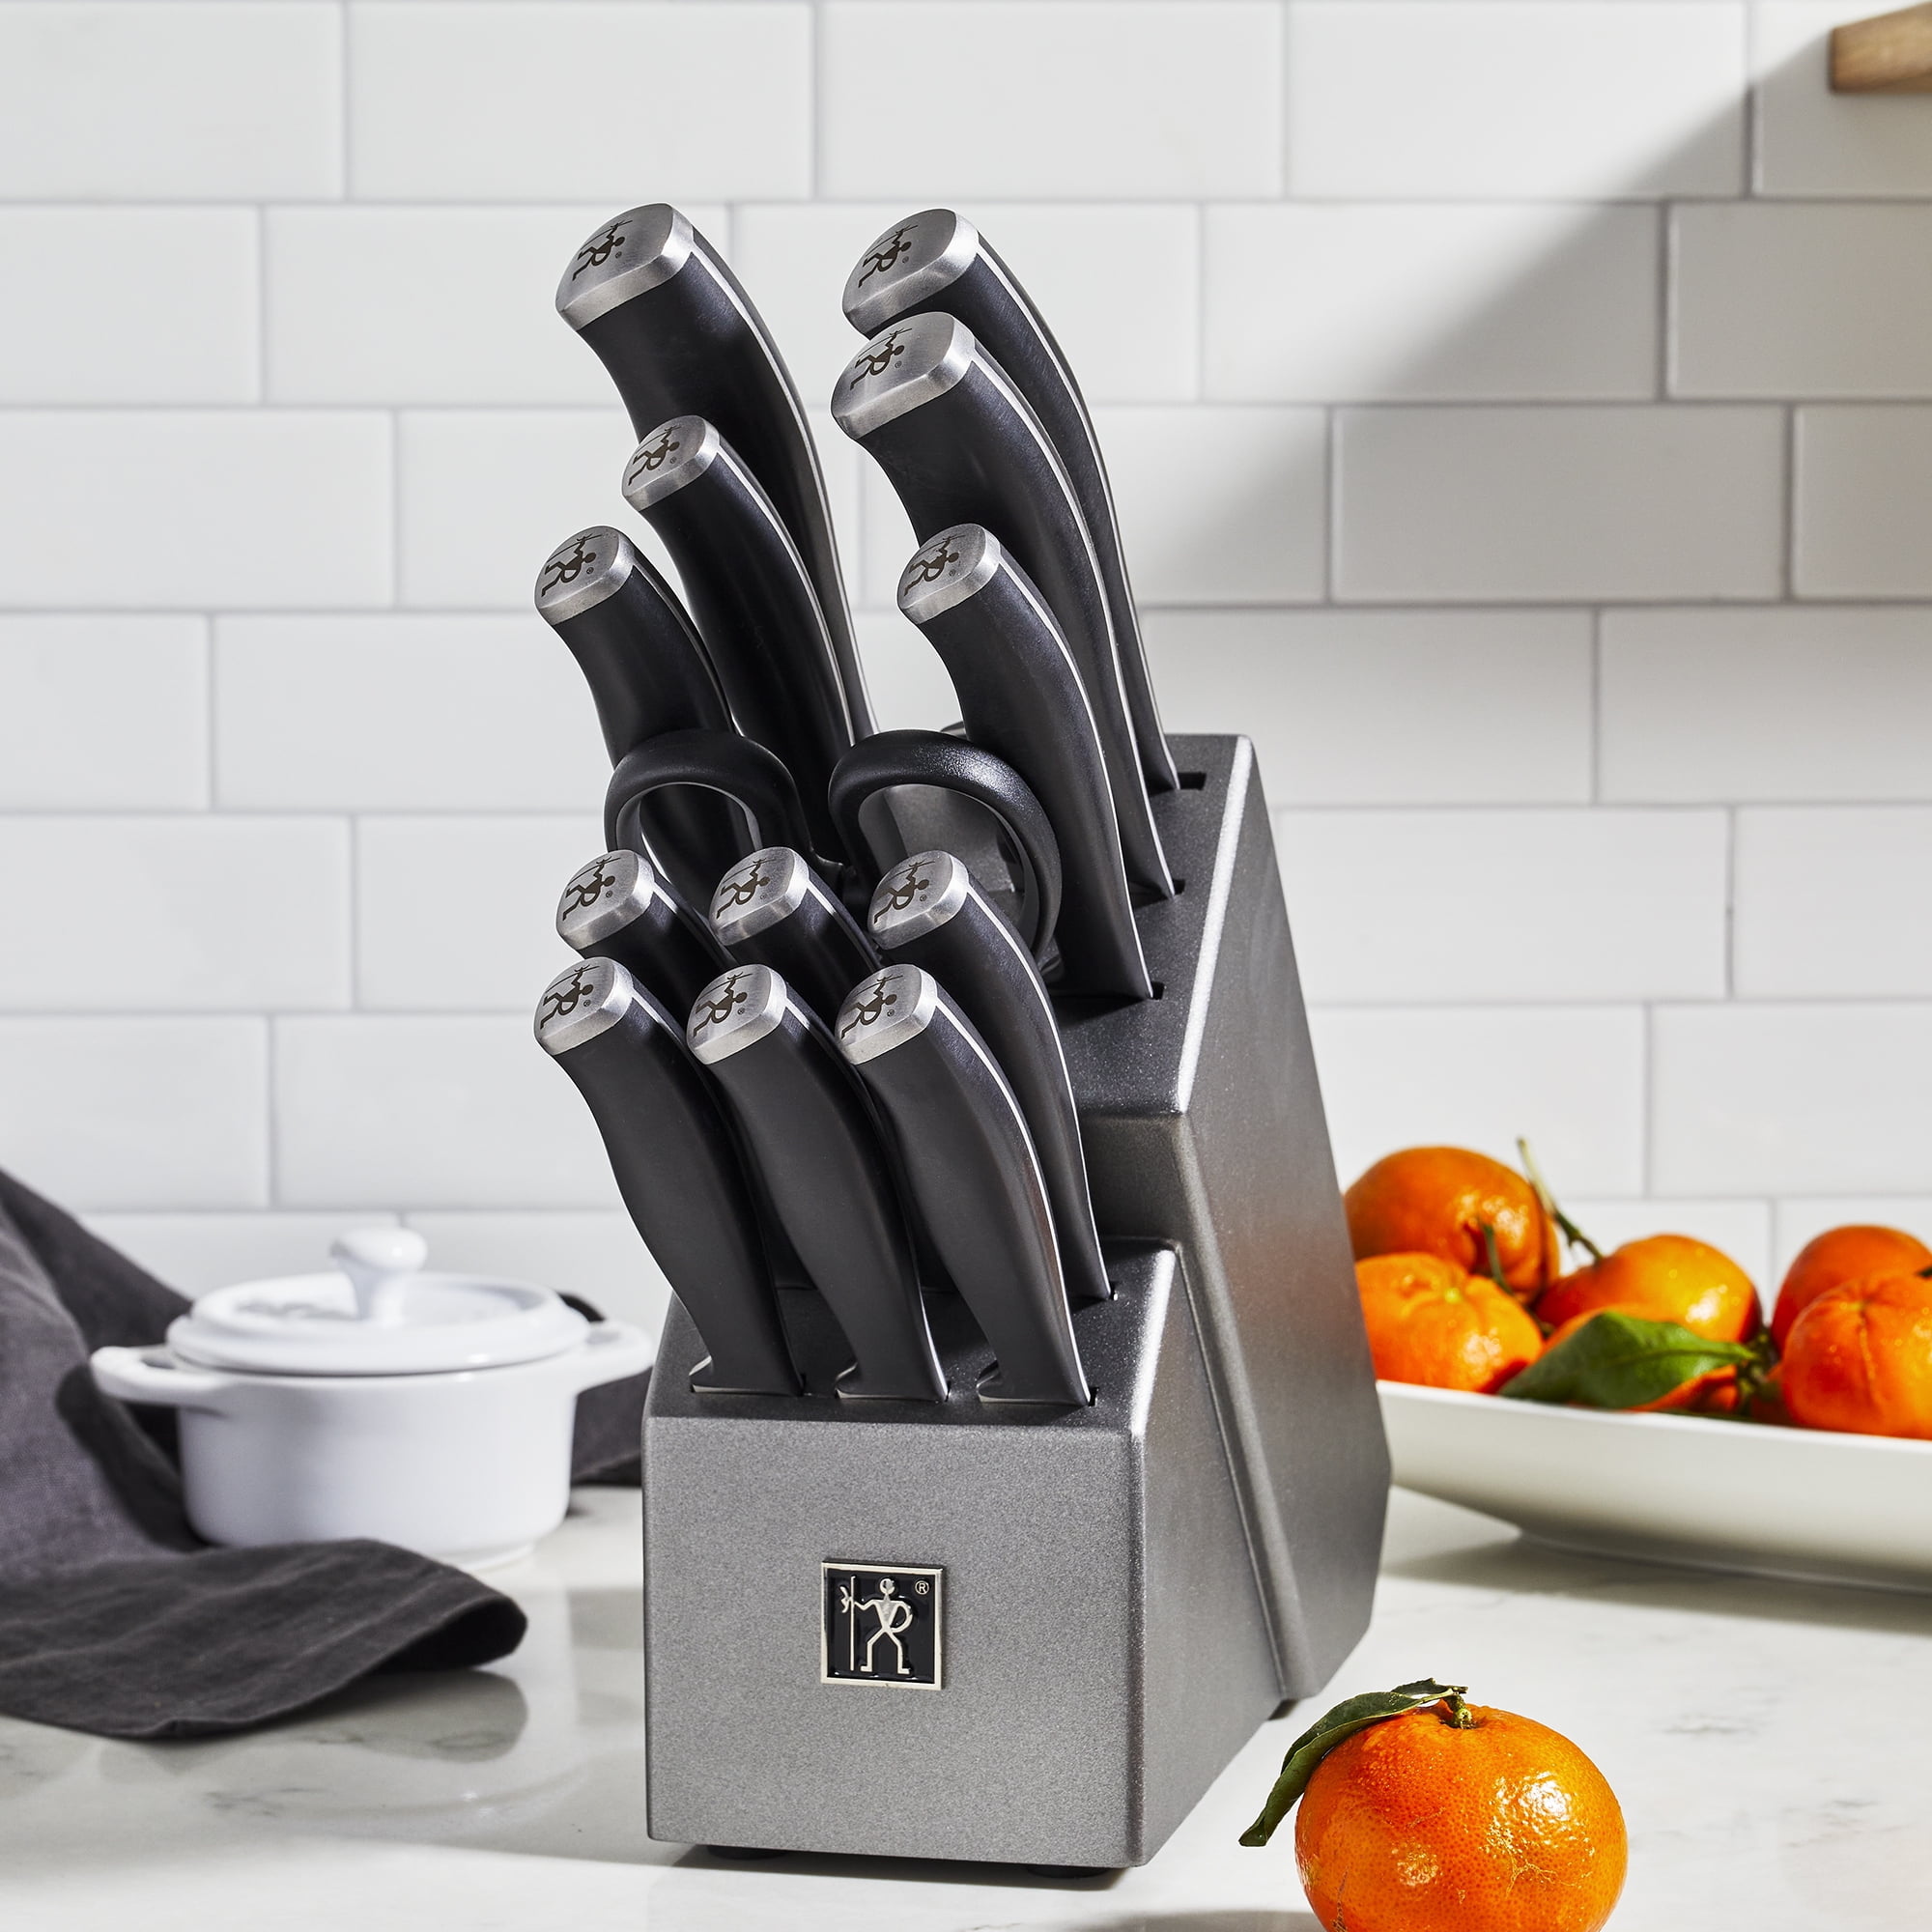 Marco Almond KYA26 14-Piece Knife Block Set with Built-in